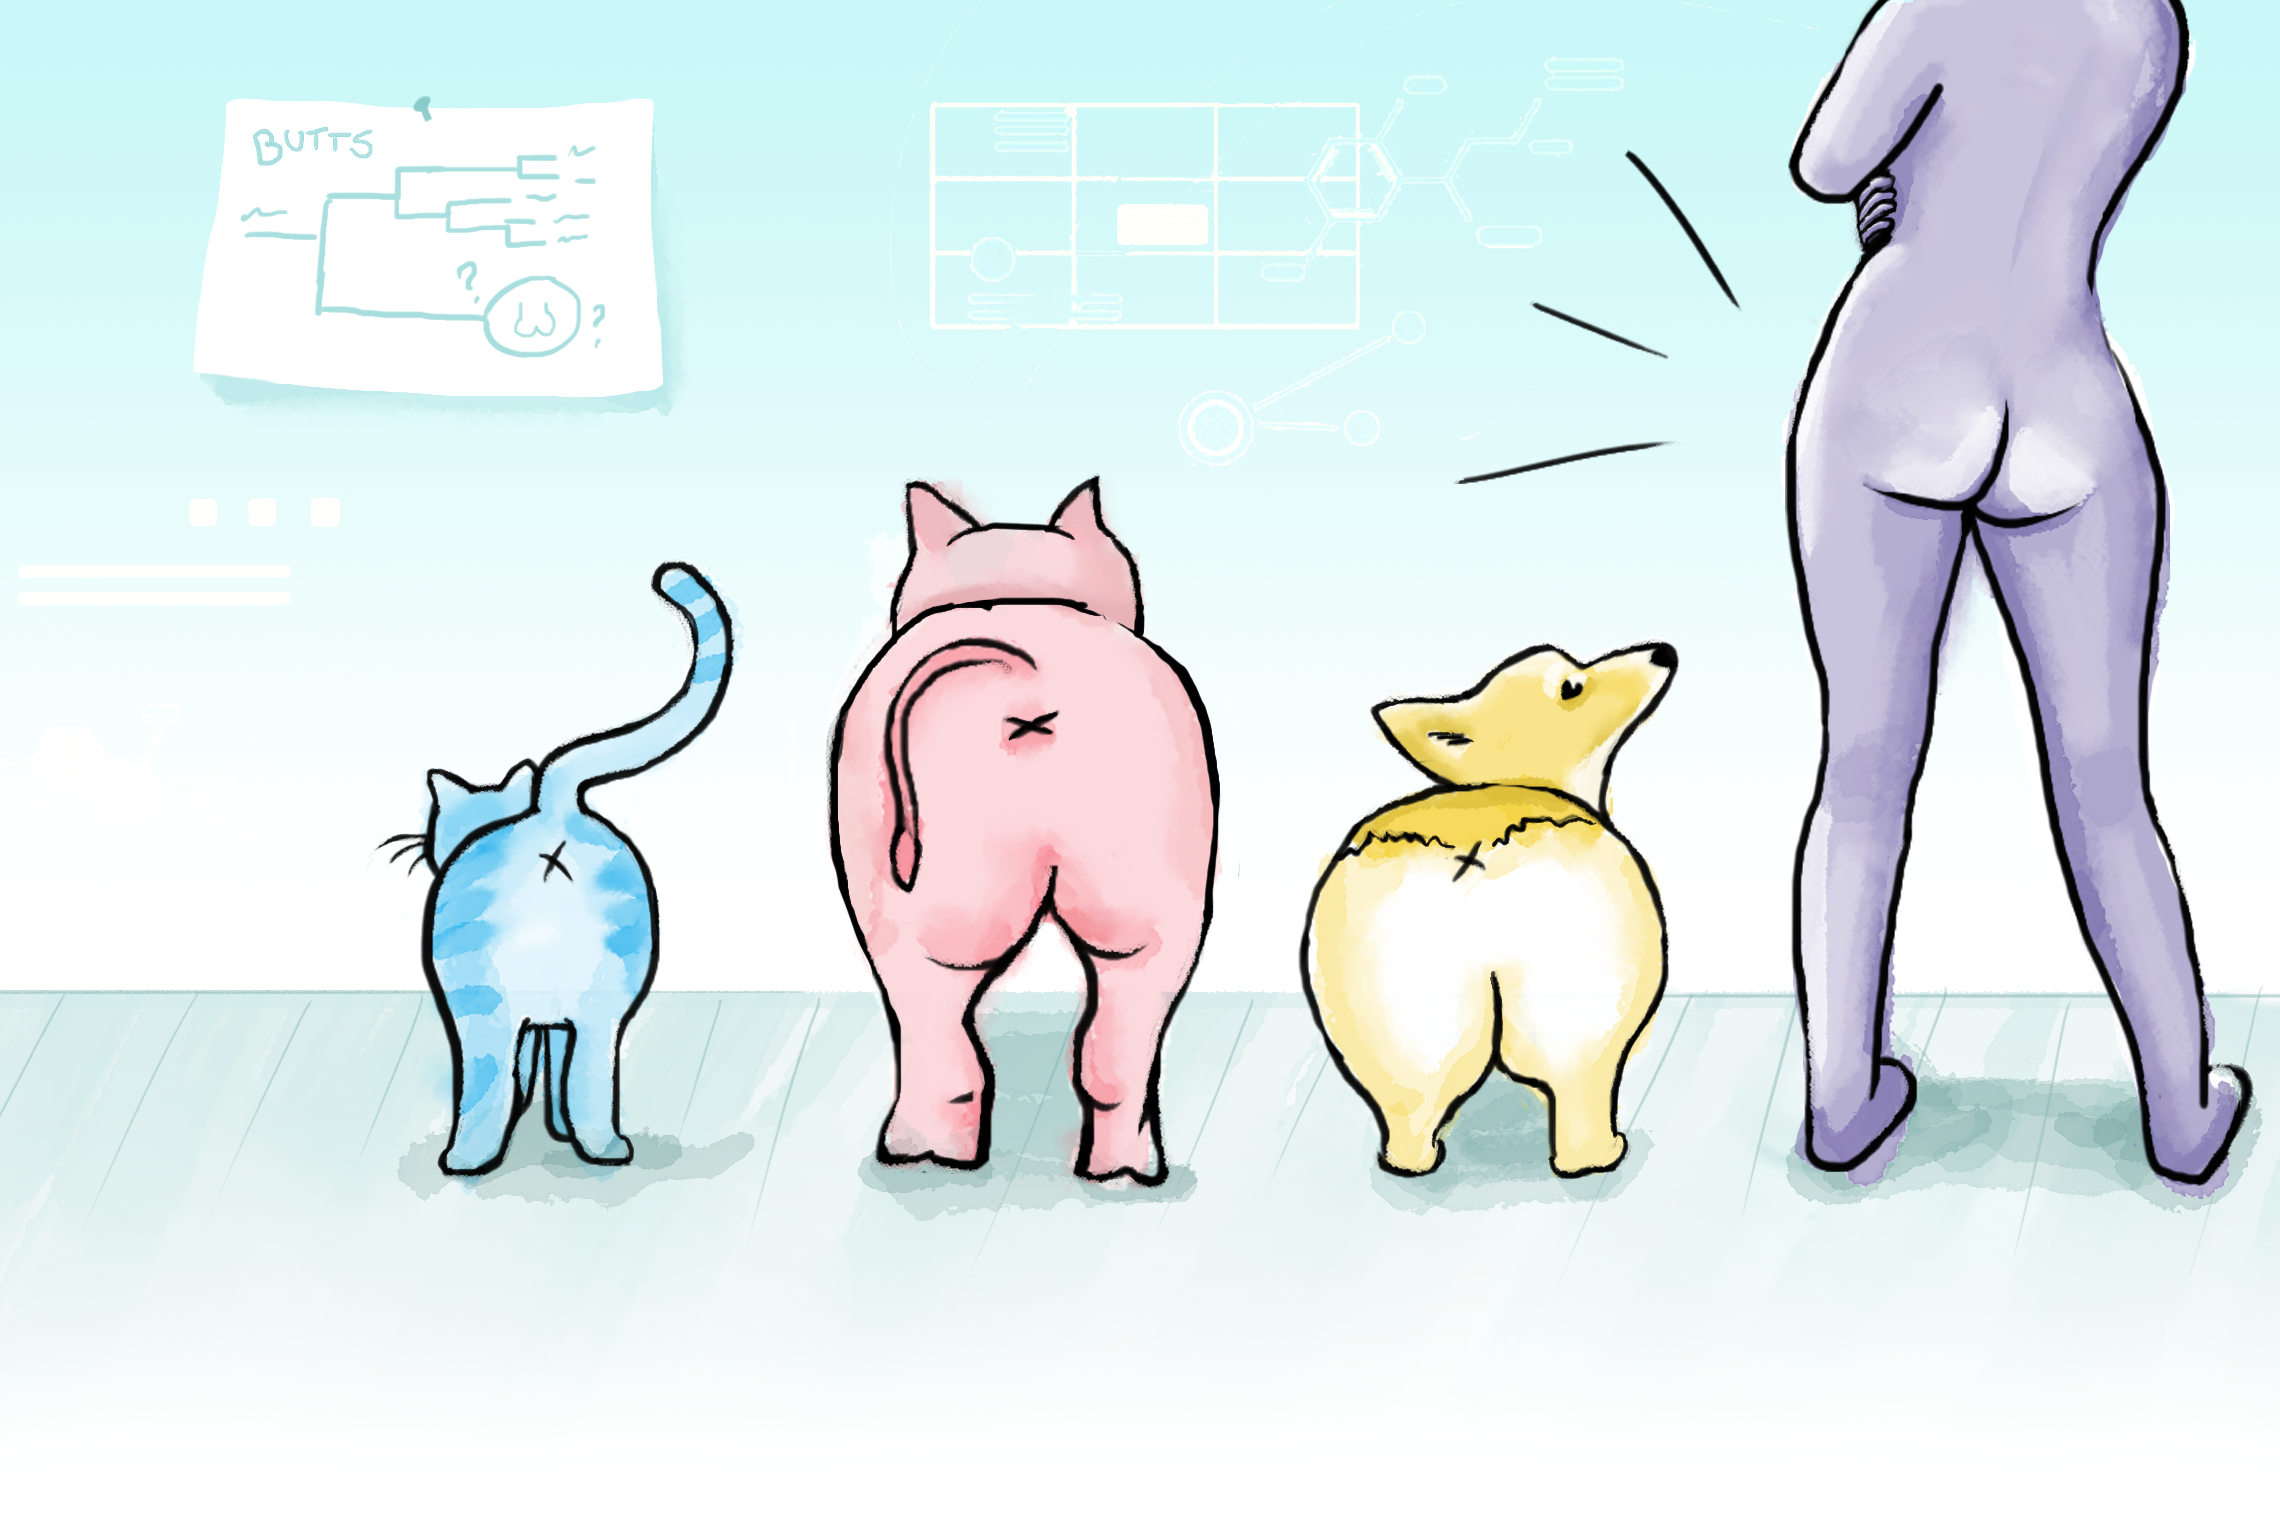 A cat, pig, dog, and human seen from the back, so their butts are most visible